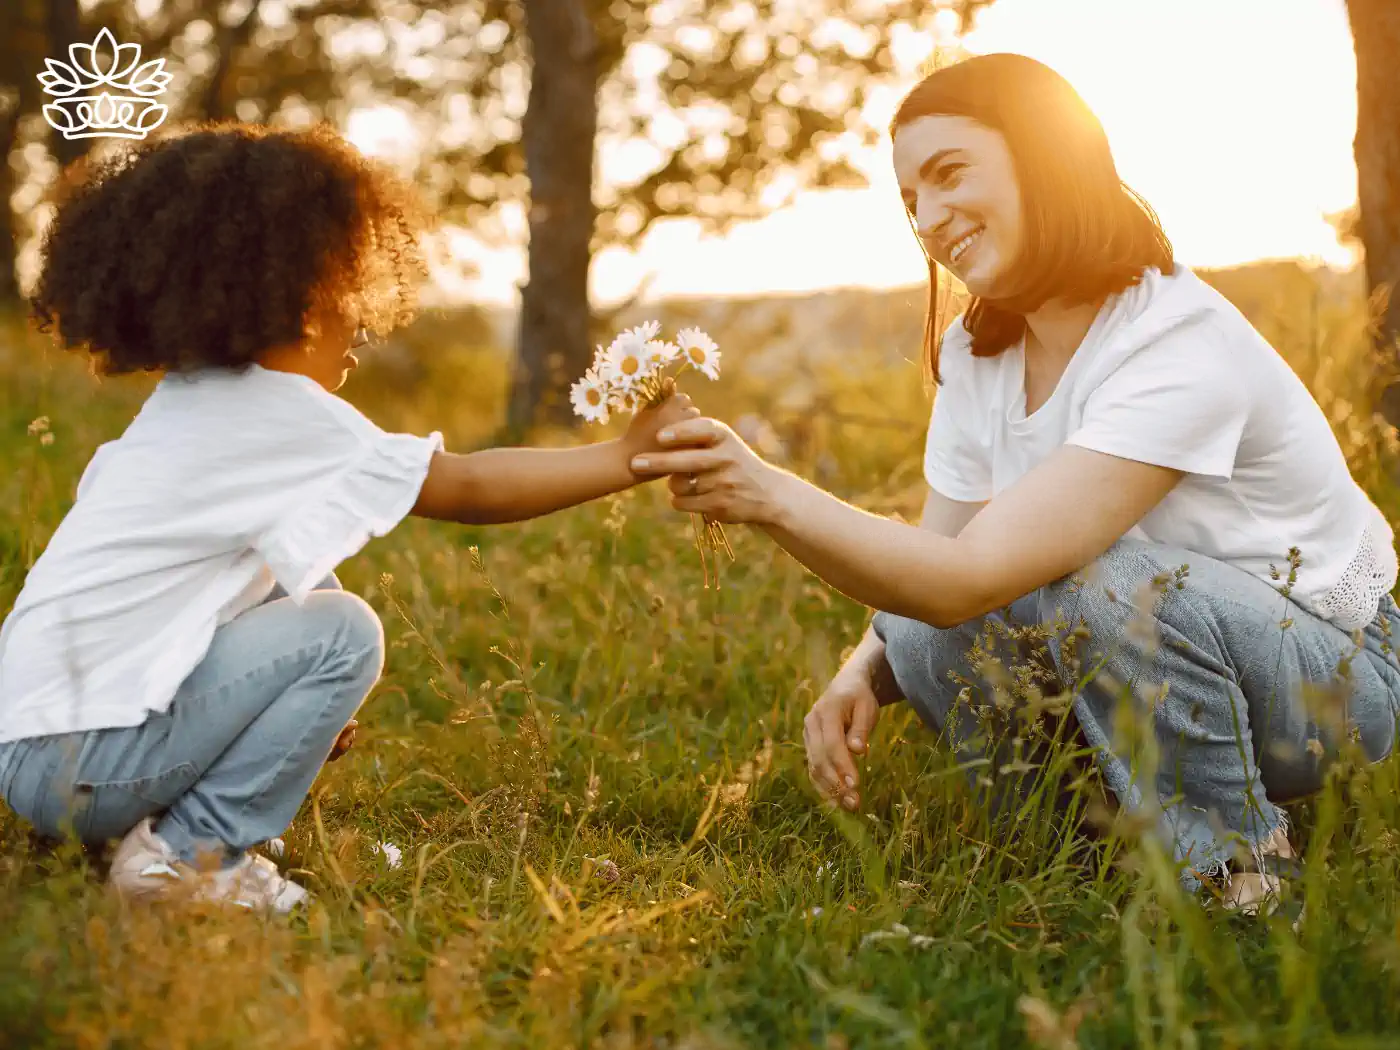 Young child offering a bunch of daisies to a smiling woman during a golden sunset in a grassy field, capturing a moment of joy and connection. Fabulous Flowers and Gifts - Thank You Flowers. Delivered with Heart.